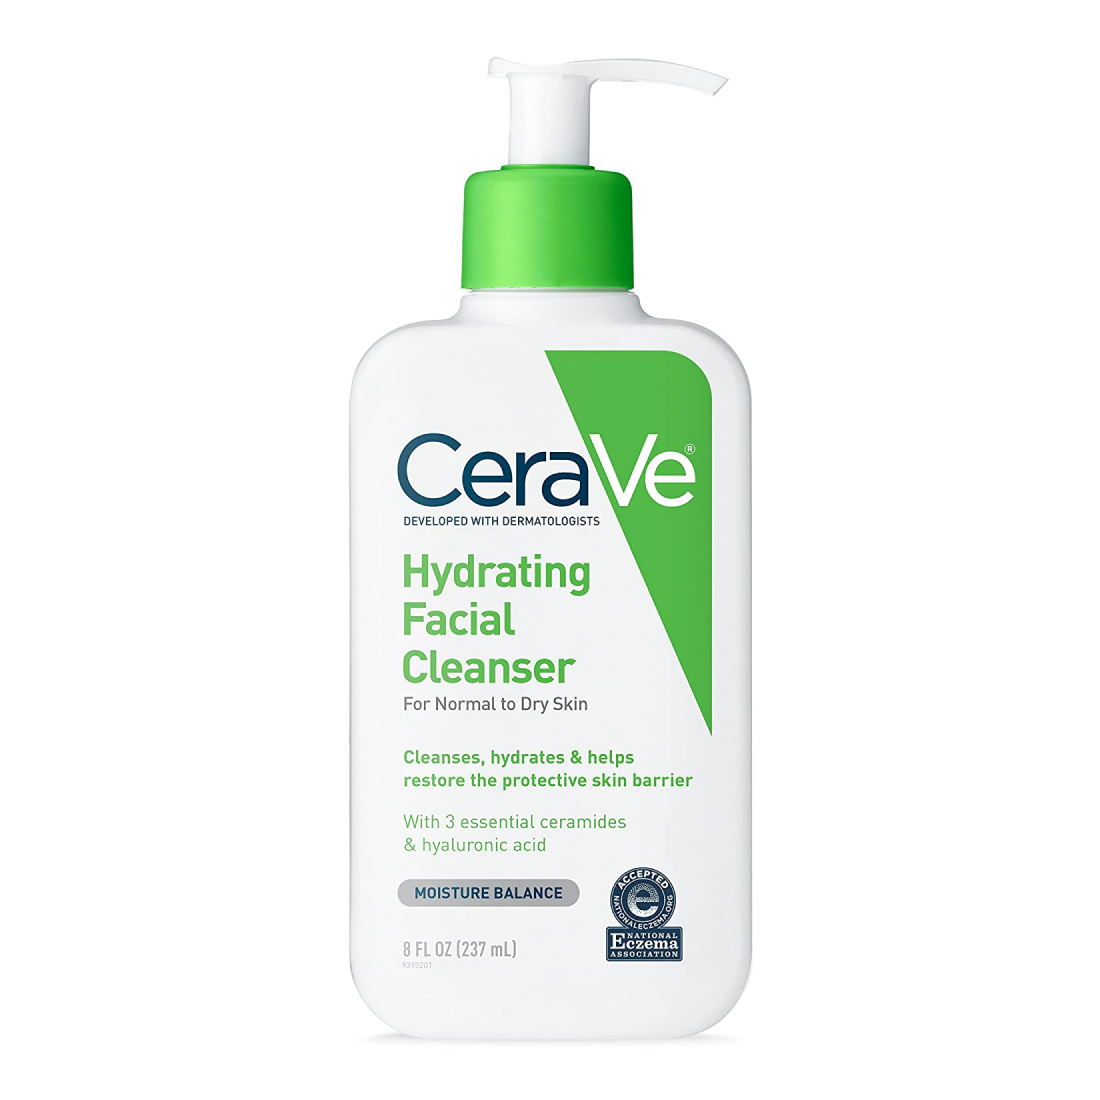 CeraVe Hydrating Facial Cleanser product image